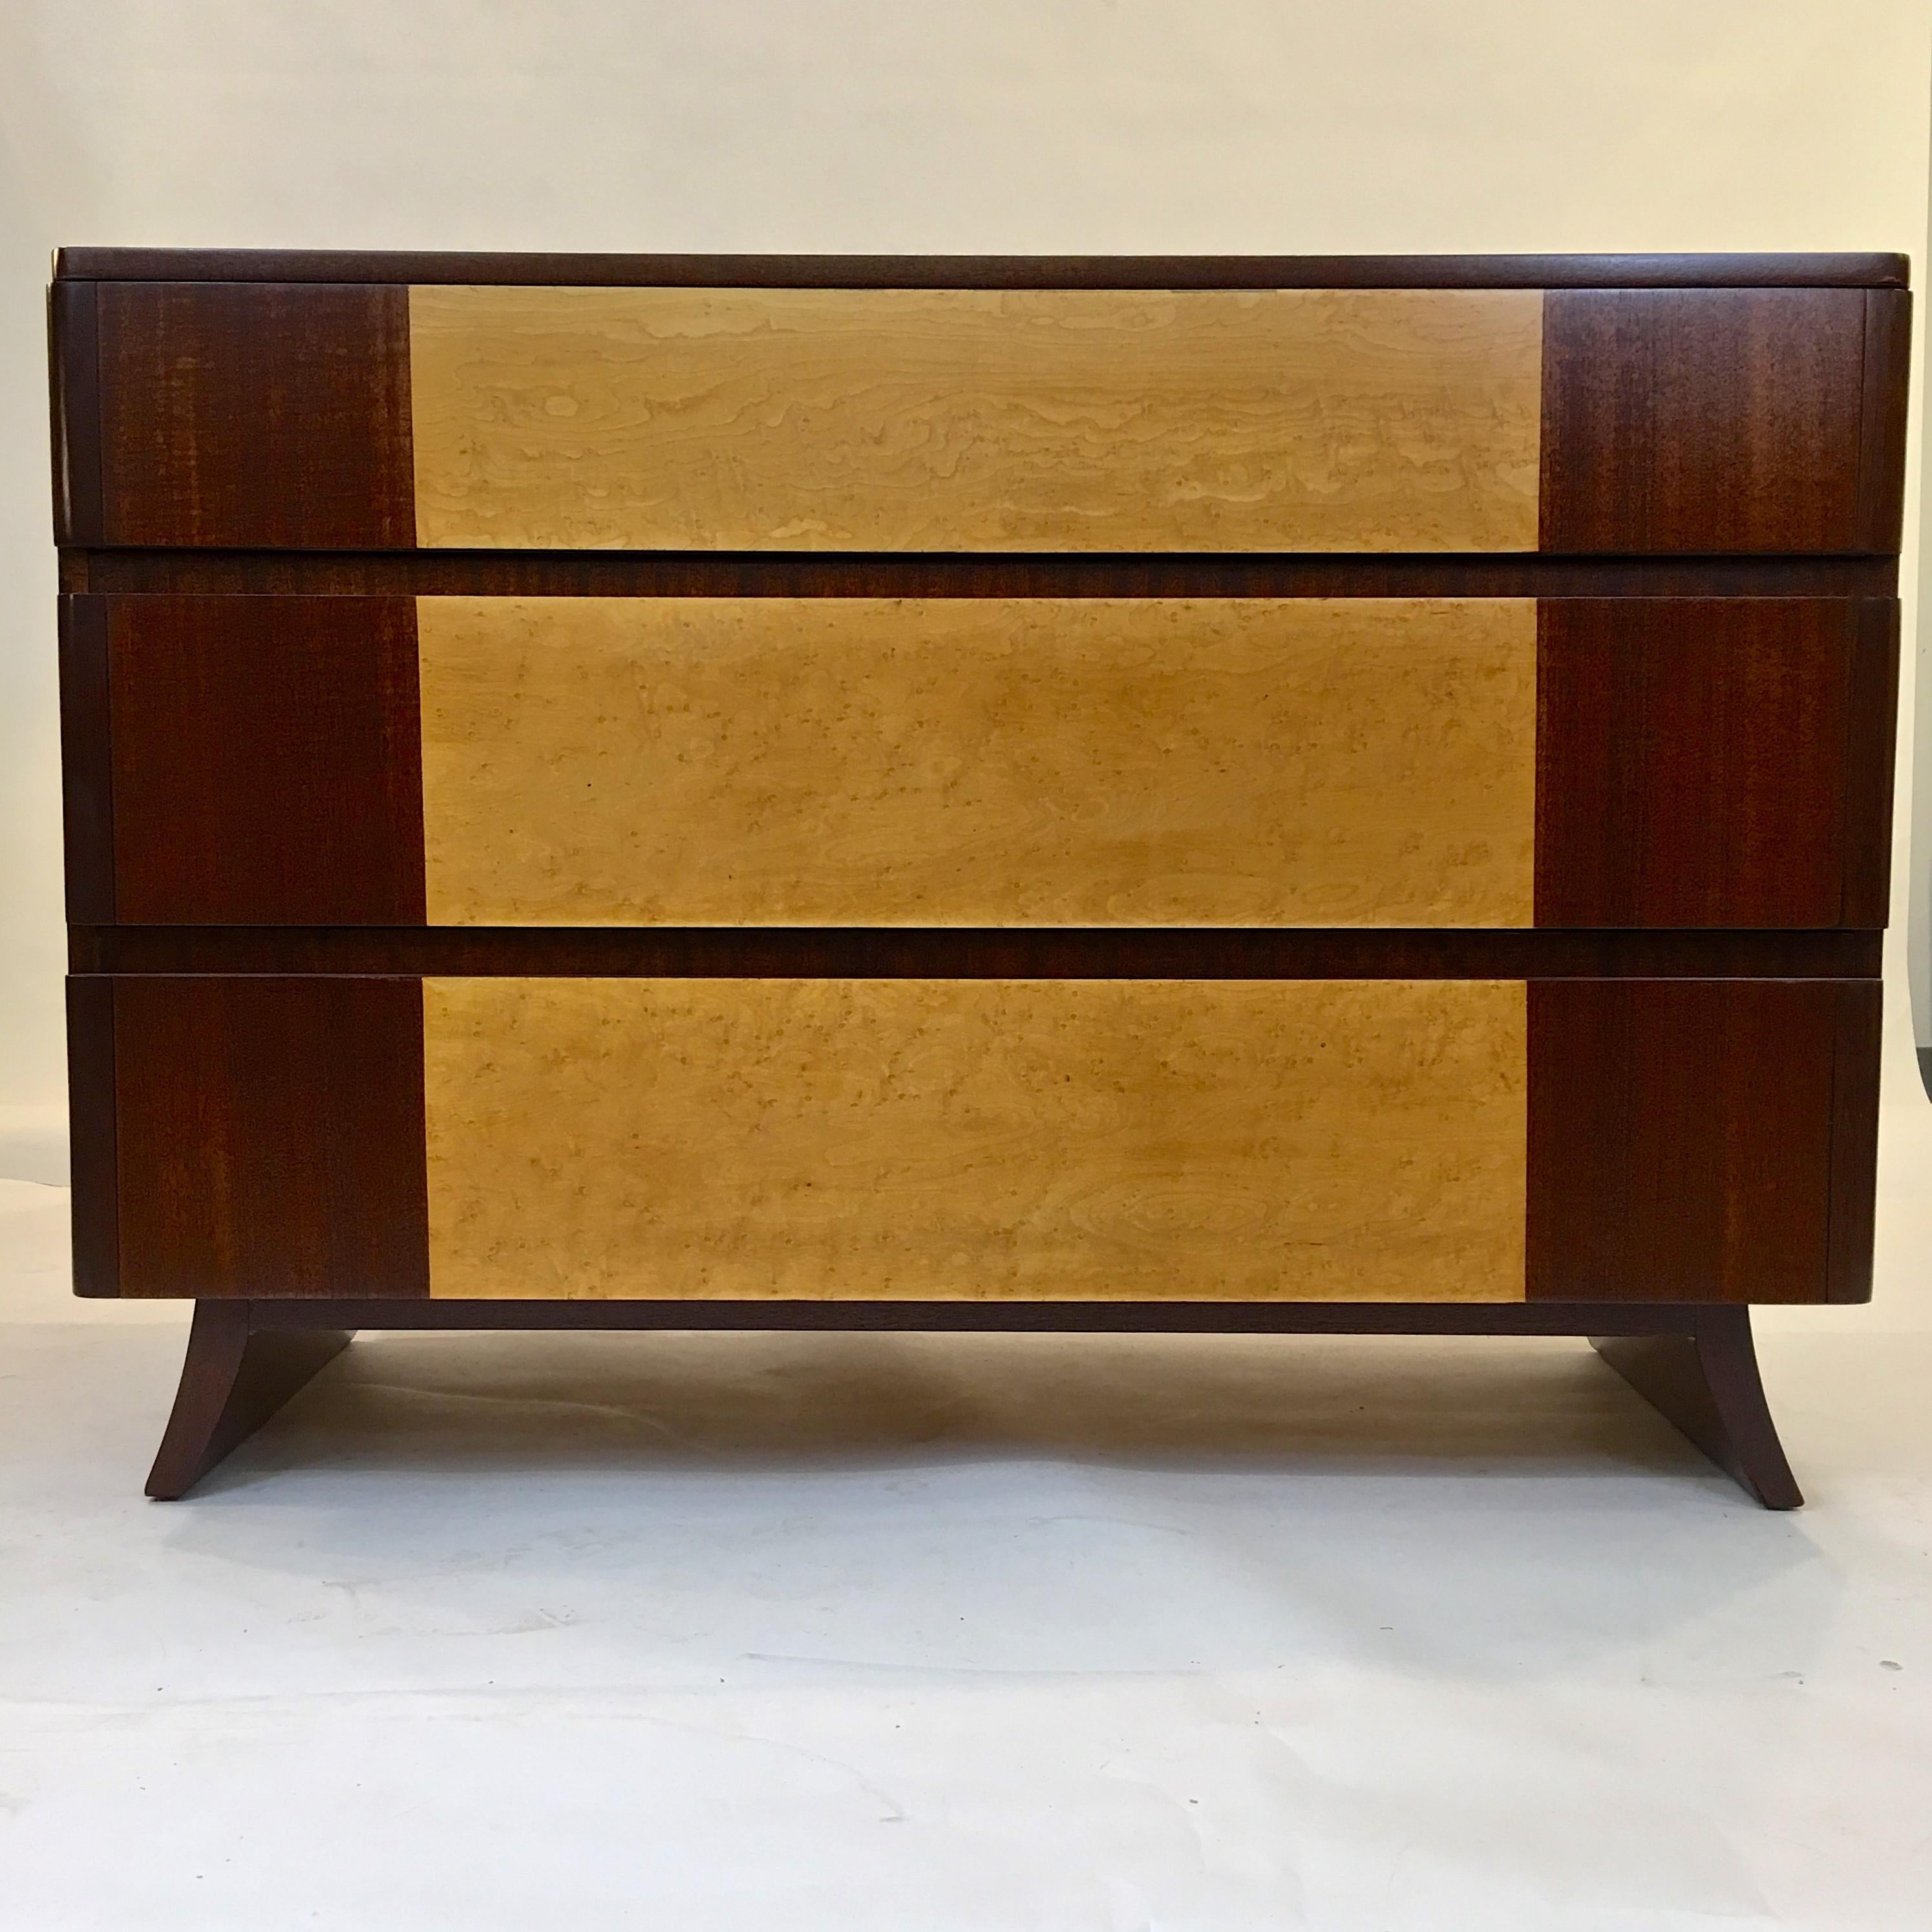 1940s American Art Deco chest of drawers with curved front edges on splayed legs by R-Way Furniture Co. in two-tone bookmatched mahogany and exotic burl elm inlay.
In the manner of Eliel Saarinen. Three commodious clean drawers. Invisible grooved